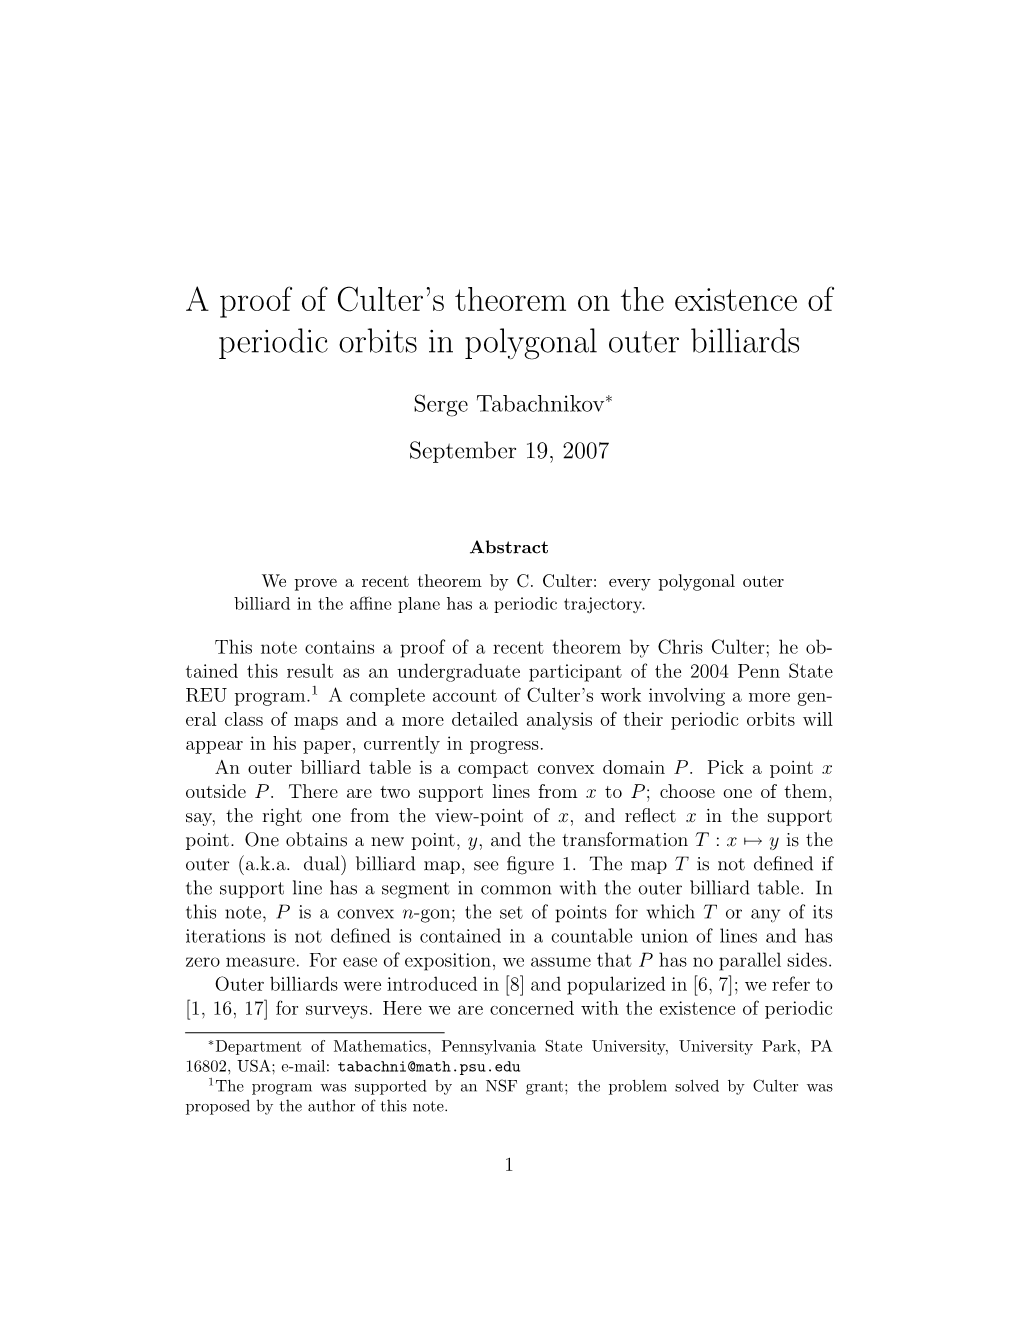 A Proof of Culter's Theorem on the Existence of Periodic Orbits In